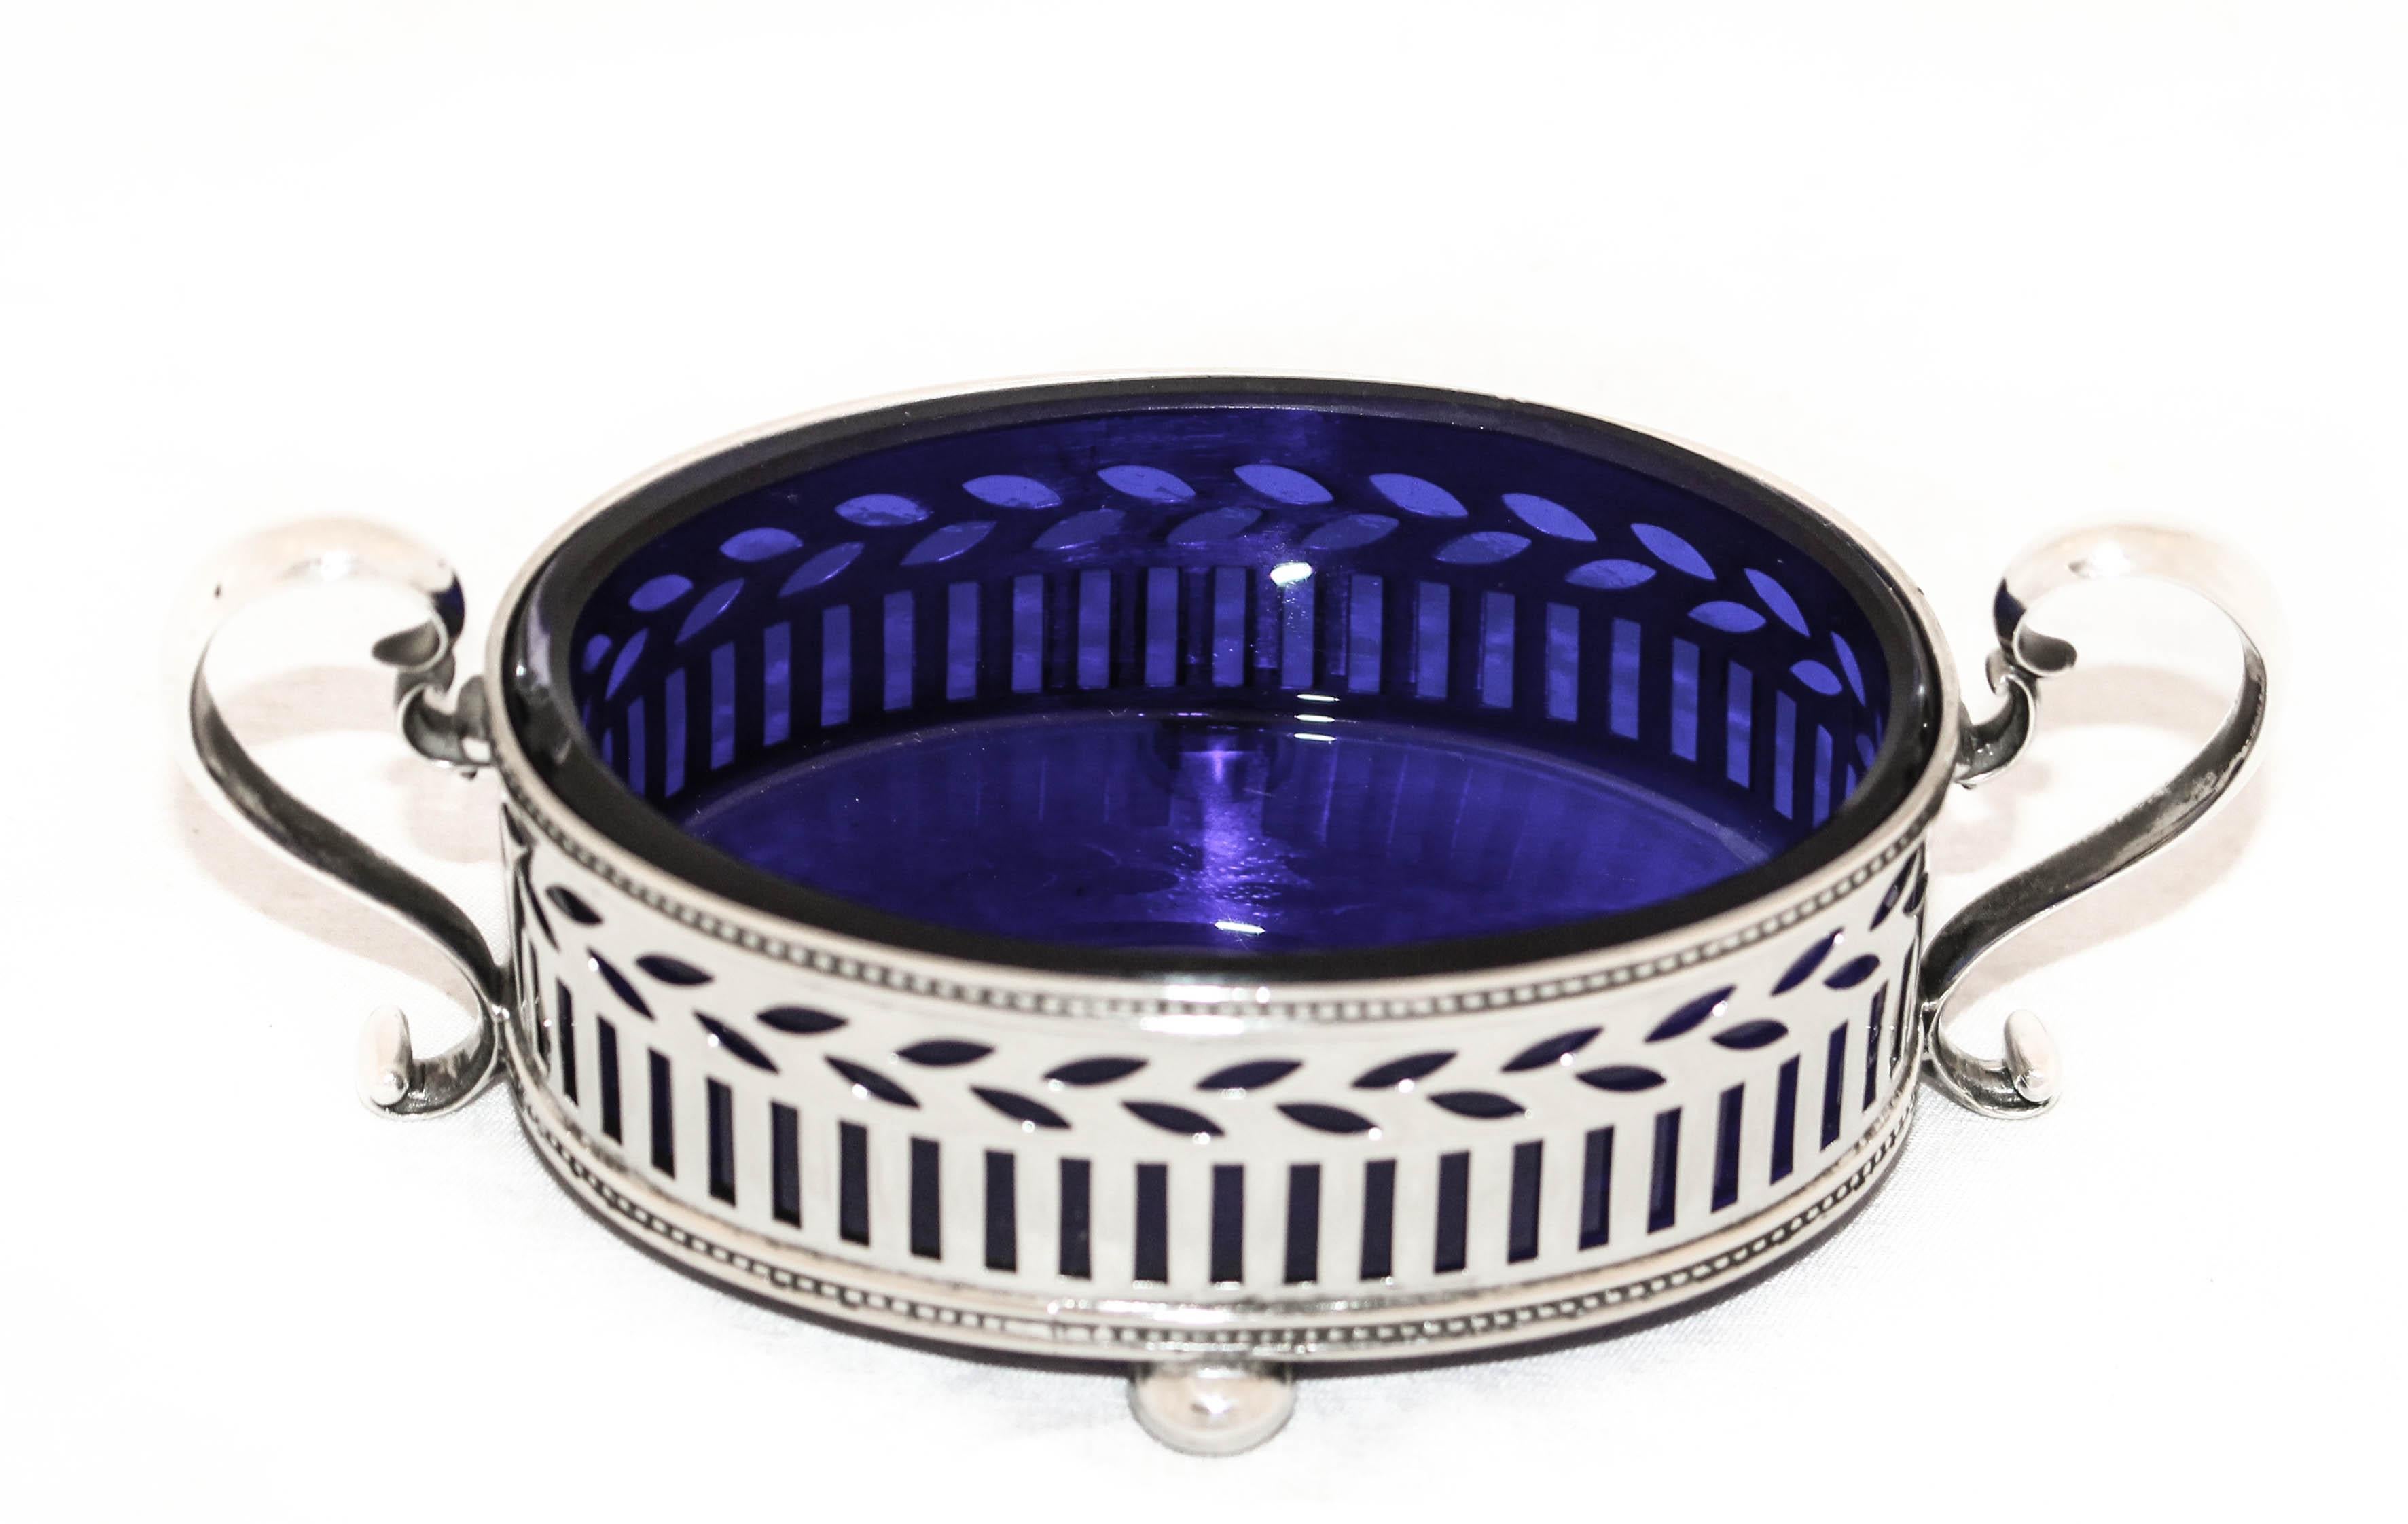 Being offered is a pair of antique sterling silver master salt cellars by the world renowned Tiffany & Company.  They have cobalt liners and a reticulated design that allows the deep blue glass to shine through.  There are swirl style handles on